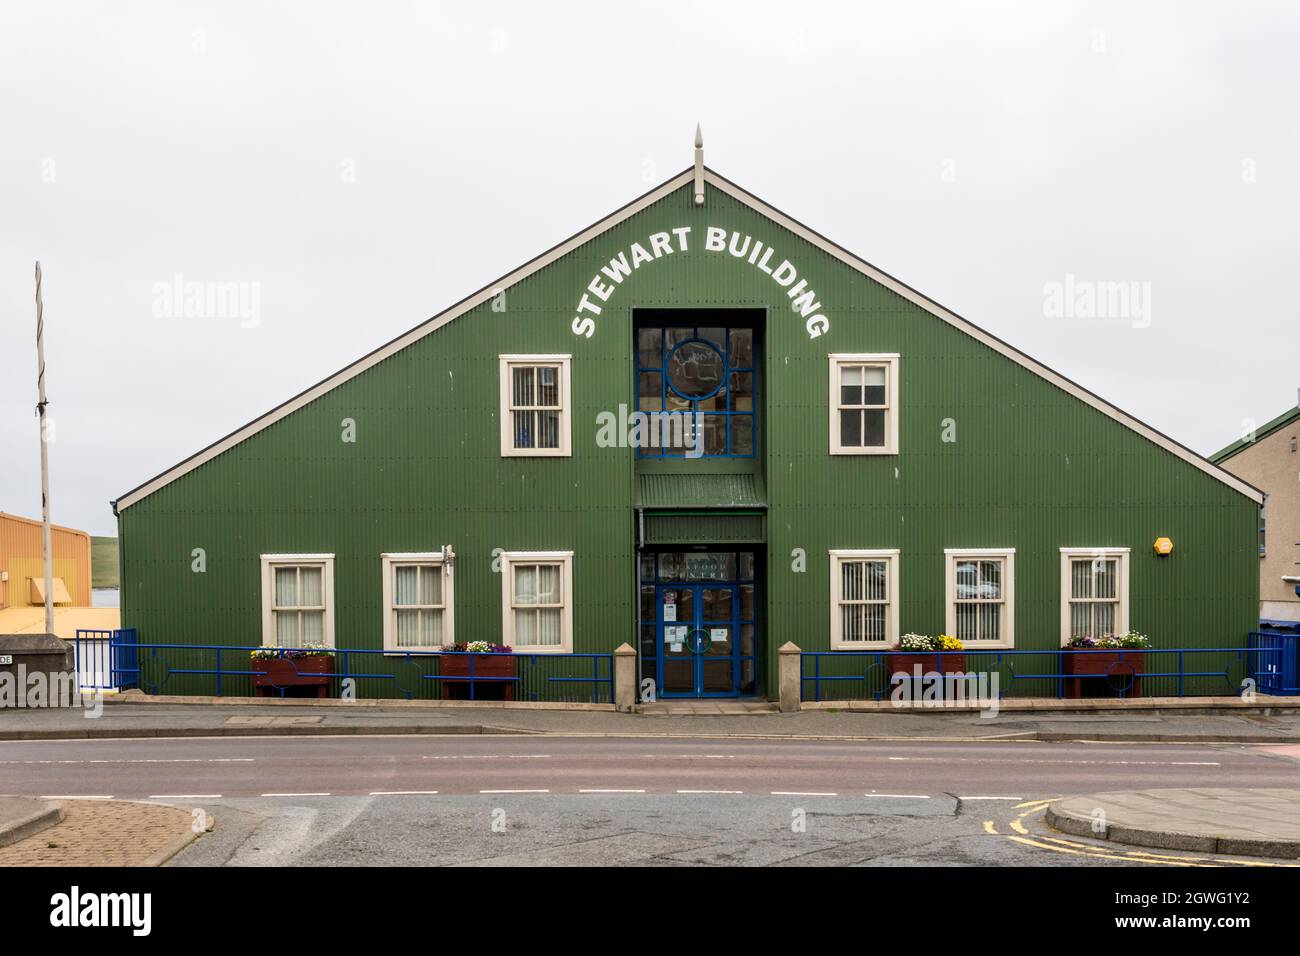 The Stewart Building in Lerwick, designed with green corrugated cladding to reflect the area's character, is the home of the Shetland Seafood Centre. Stock Photo